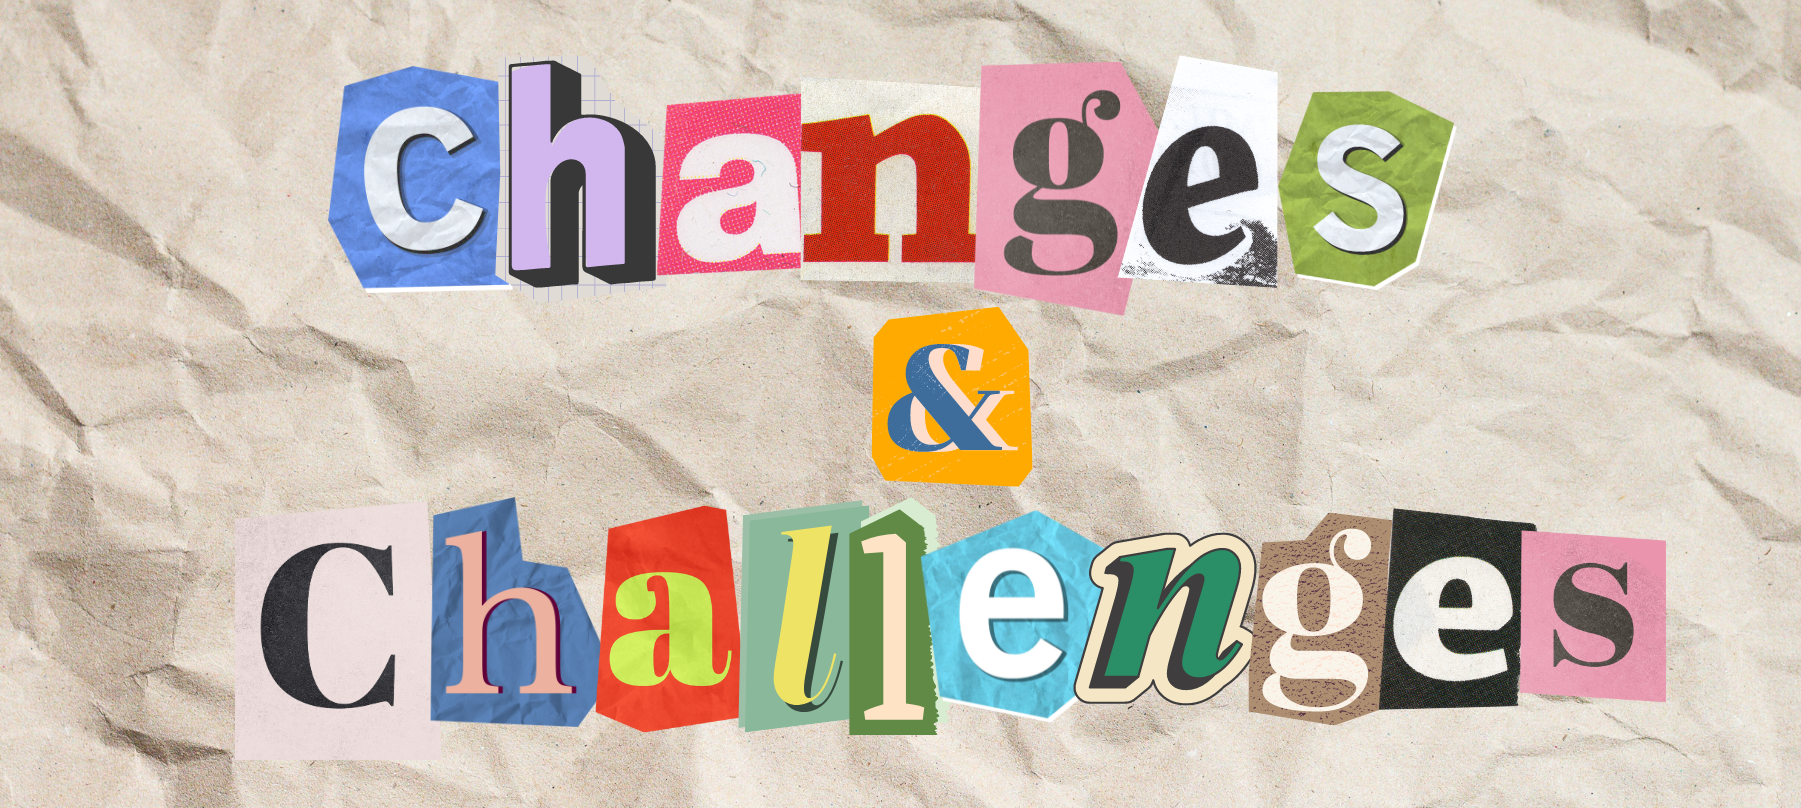 Cut-out letters on wrinkled paper spell &quot;changes &amp;amp; challenges.&quot;